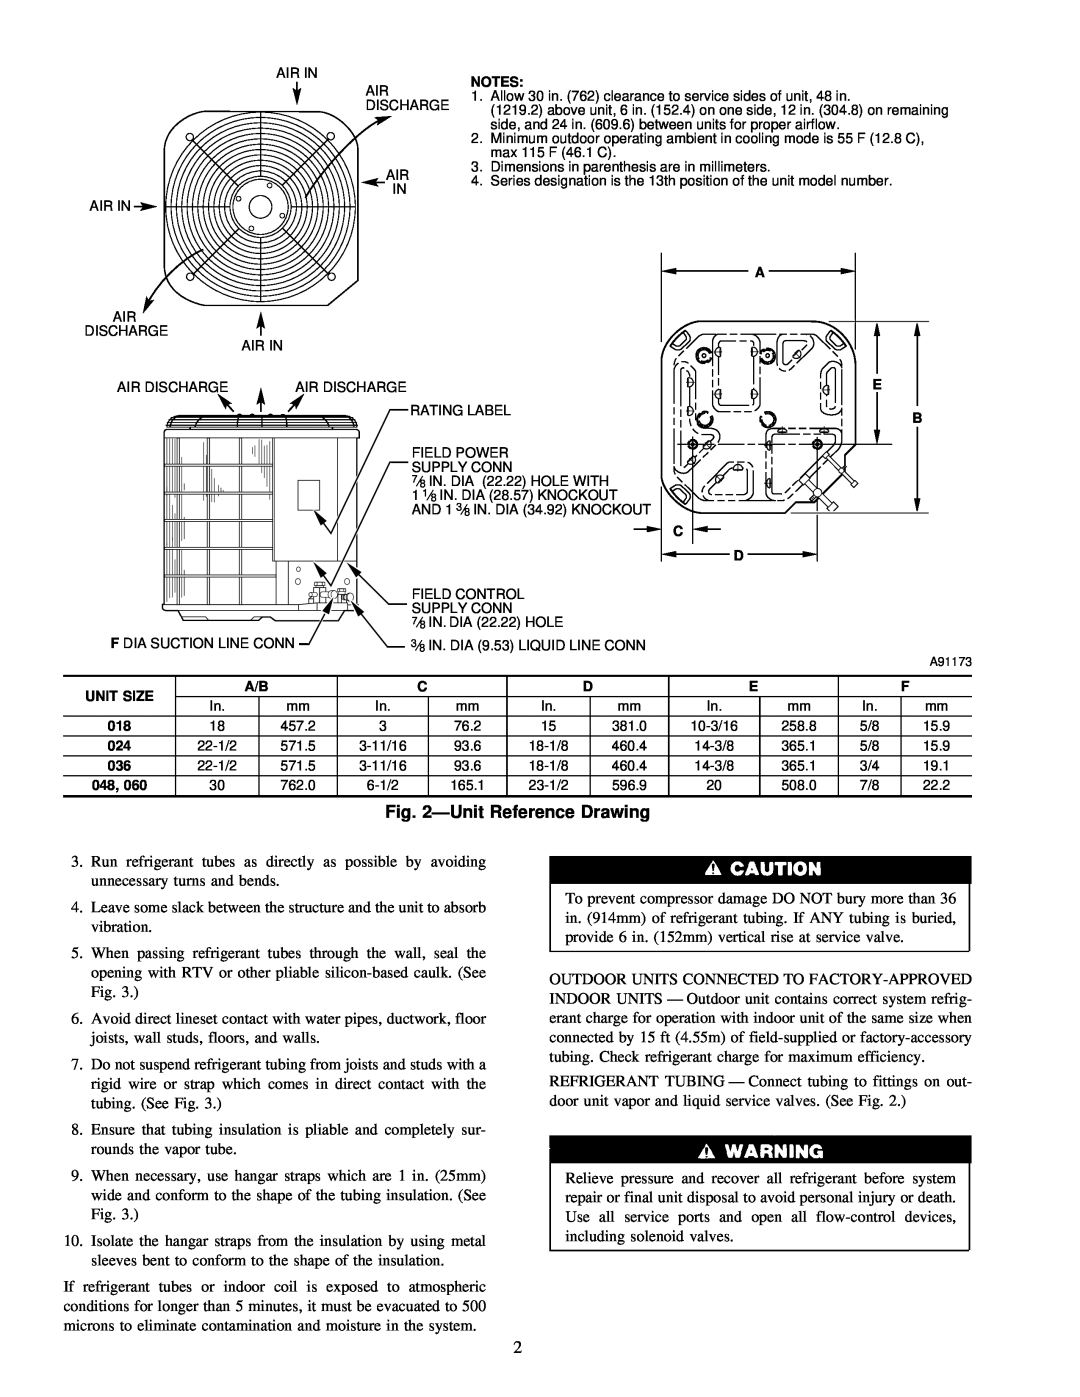 Carrier 38CKB instruction manual ÐUnit Reference Drawing 